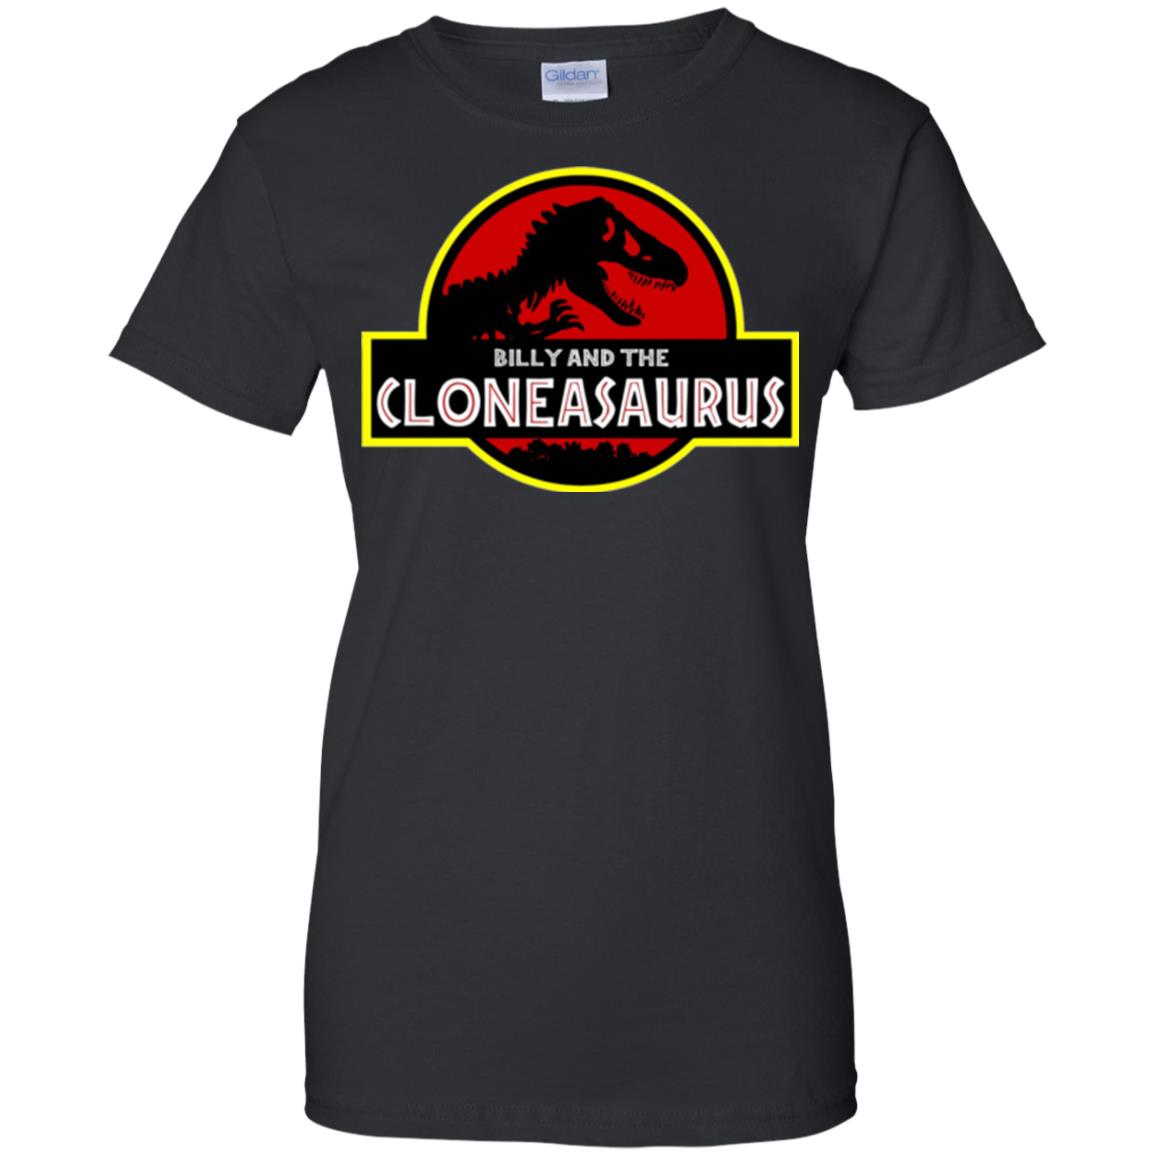 Billy And The Cloneasaurus Shirt - 10% Off - FavorMerch